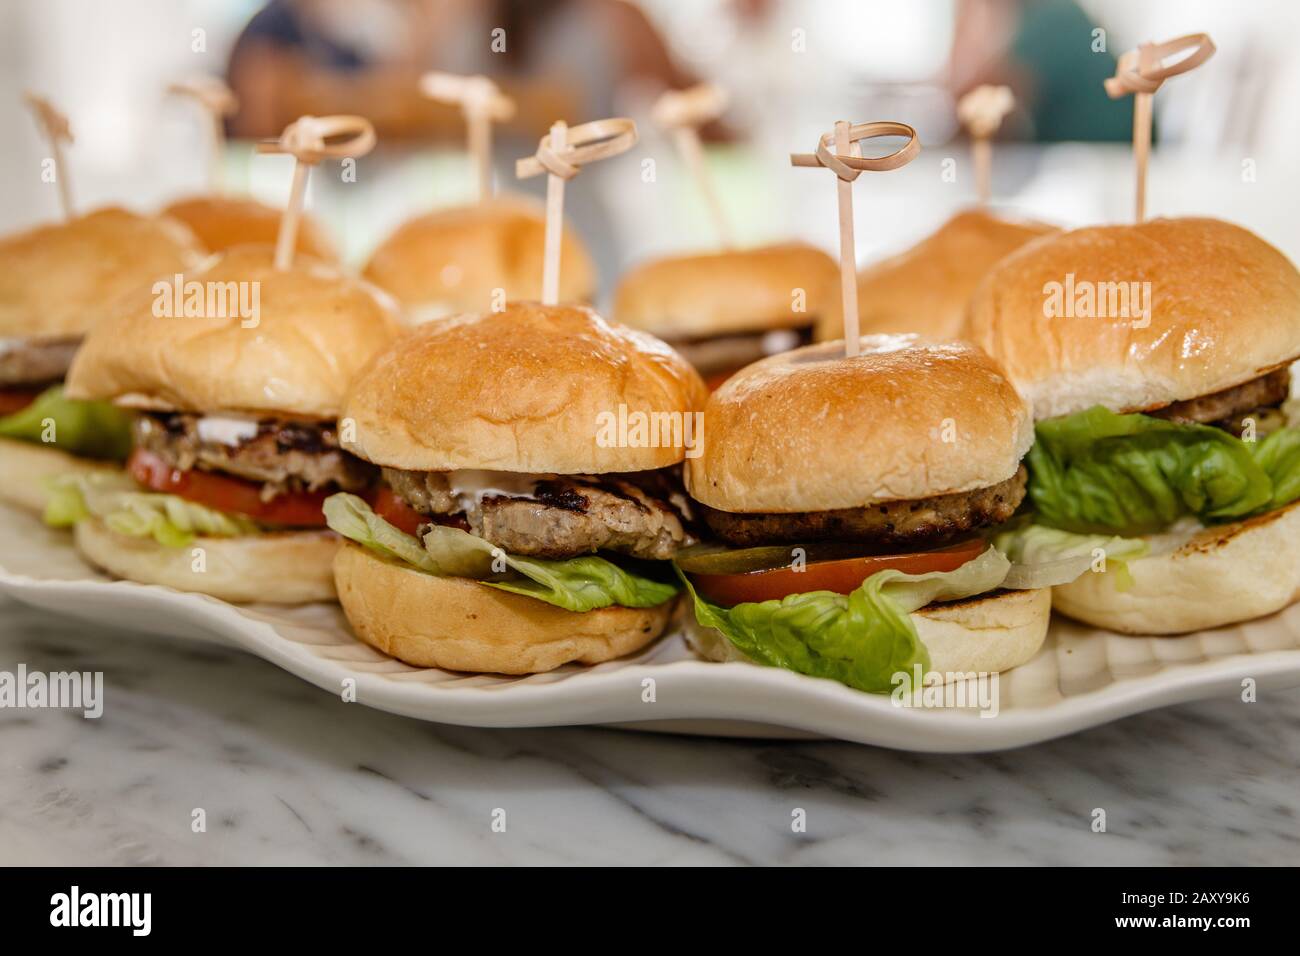 Burgers with beef patty, fresh tomato, lettuce, fried onion and melted cheese held with a wooden skewer, served on a white ceramic plate. Stock Photo